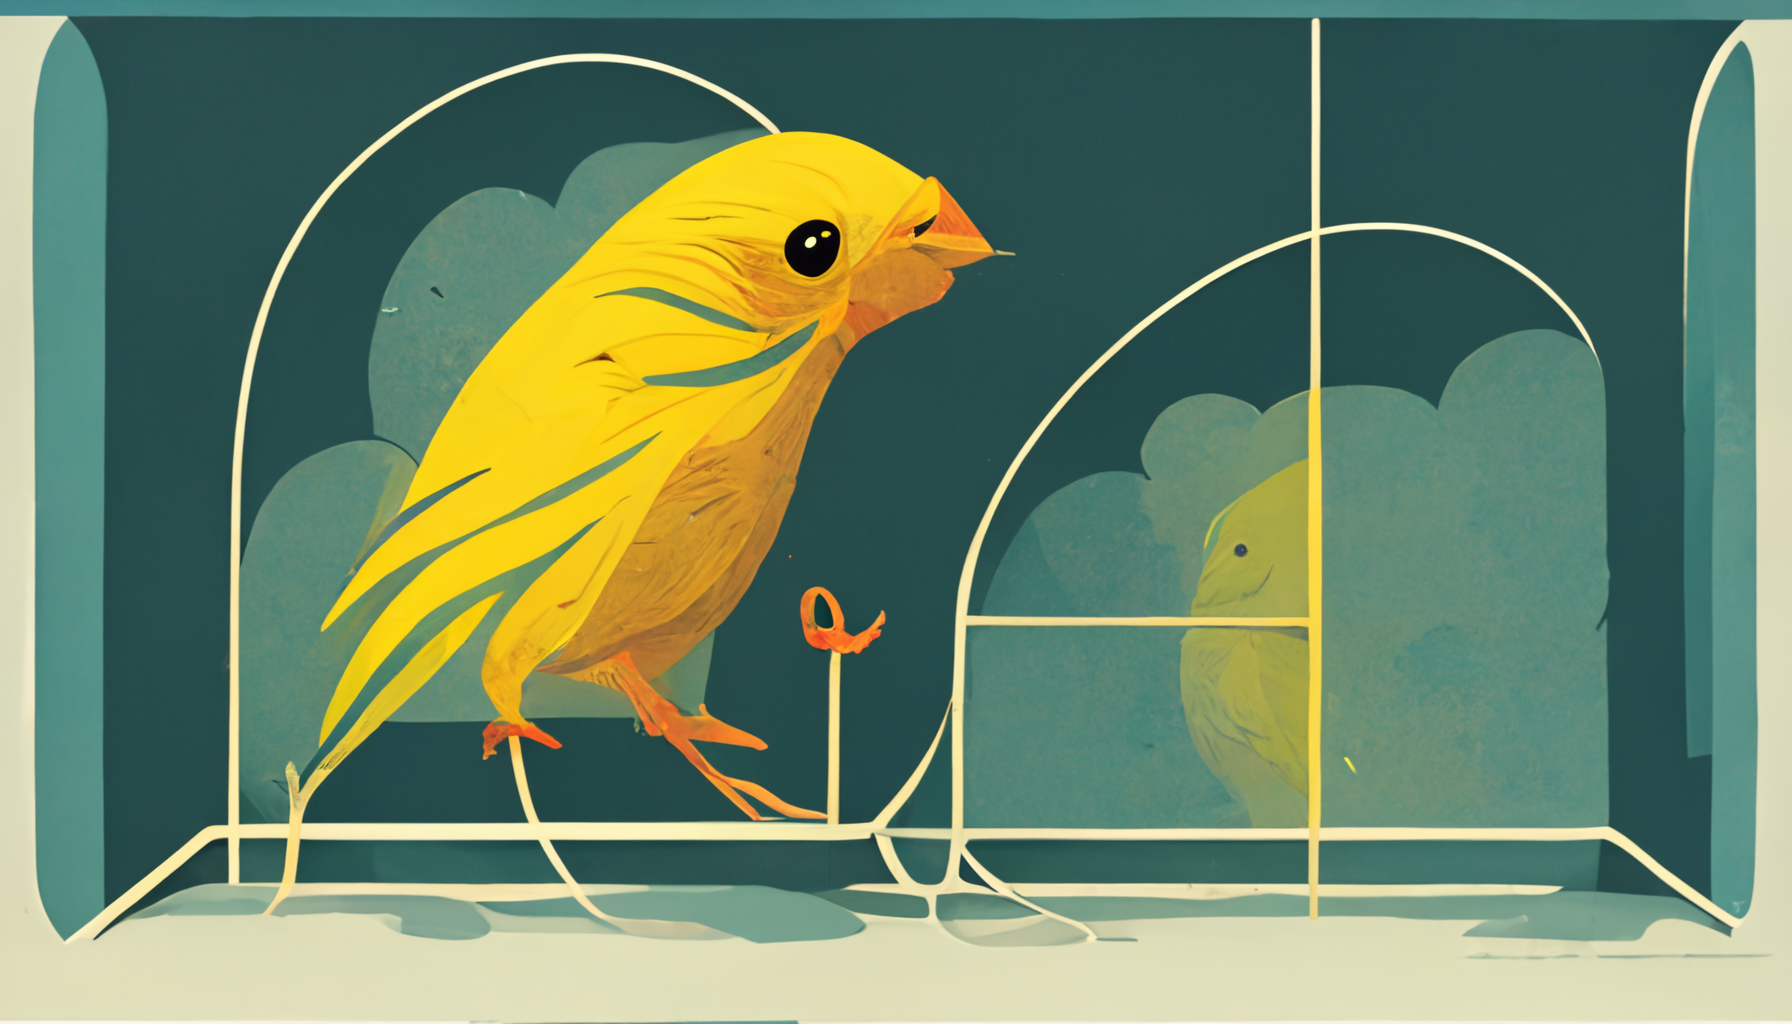 The Canary becomes a flock: left-wing site reforms as a workers’ co-operative